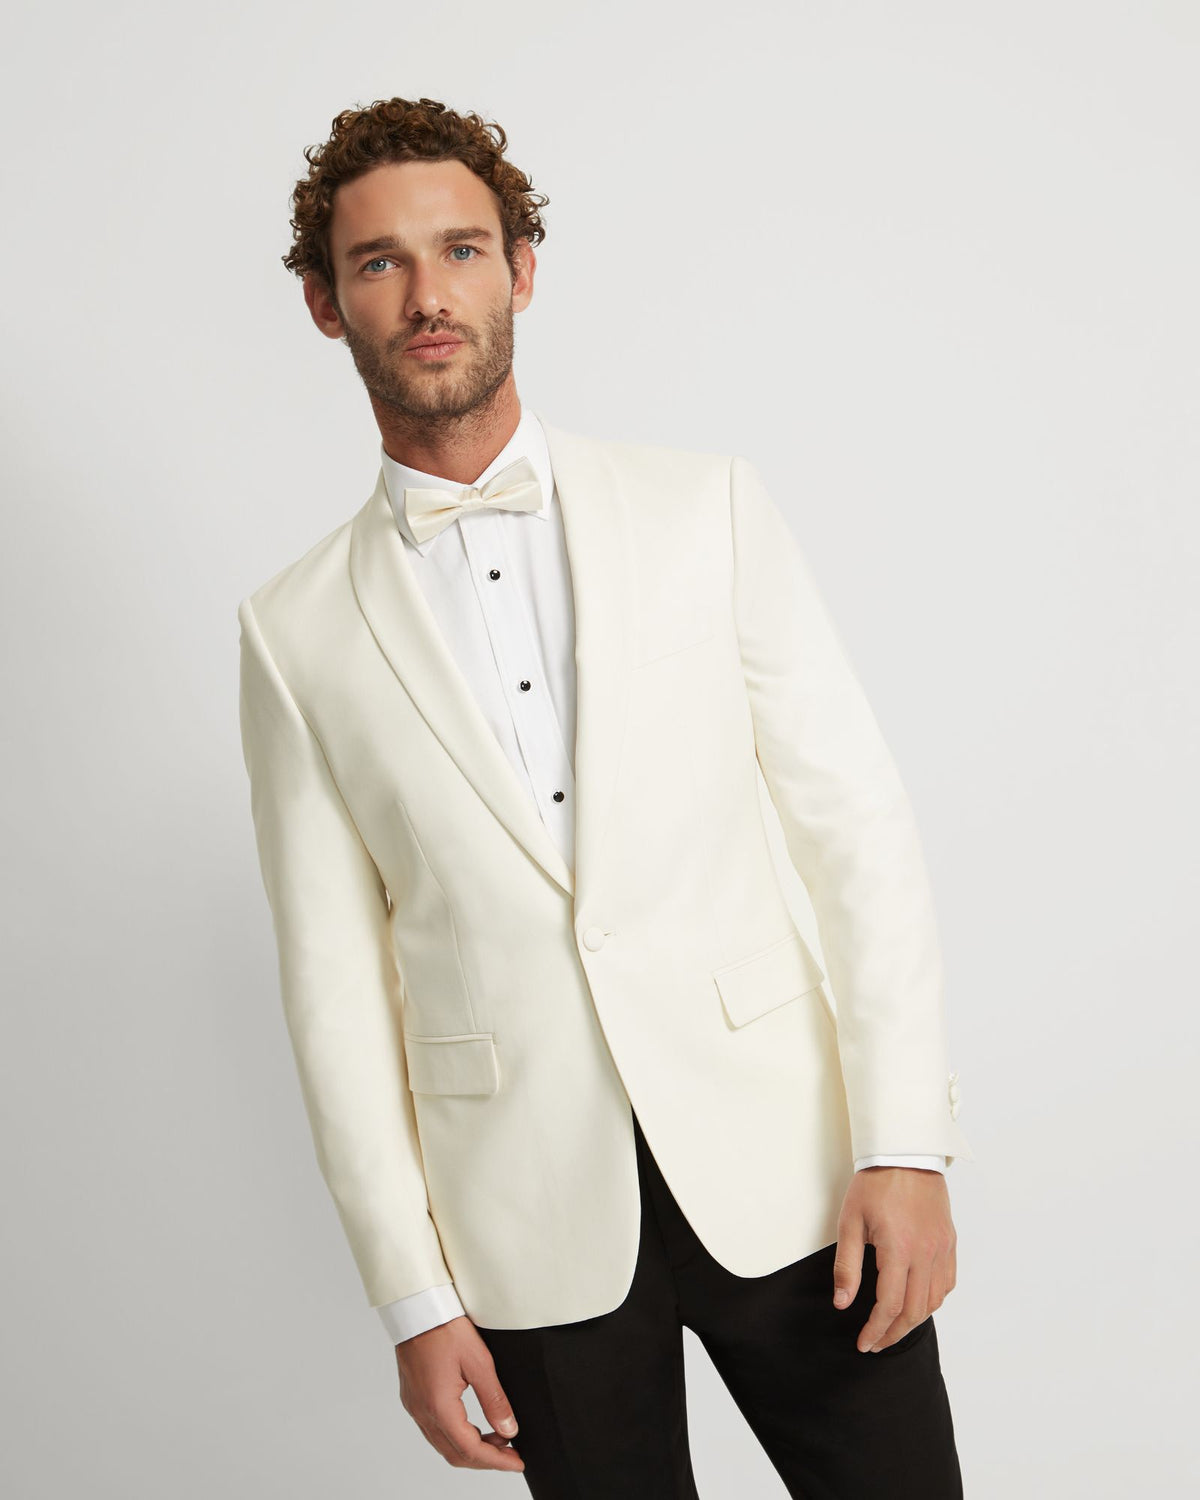 SHAWL NECK DINNER SUIT JACKET - AVAILABLE ~ 1-2 weeks MENS SUITS